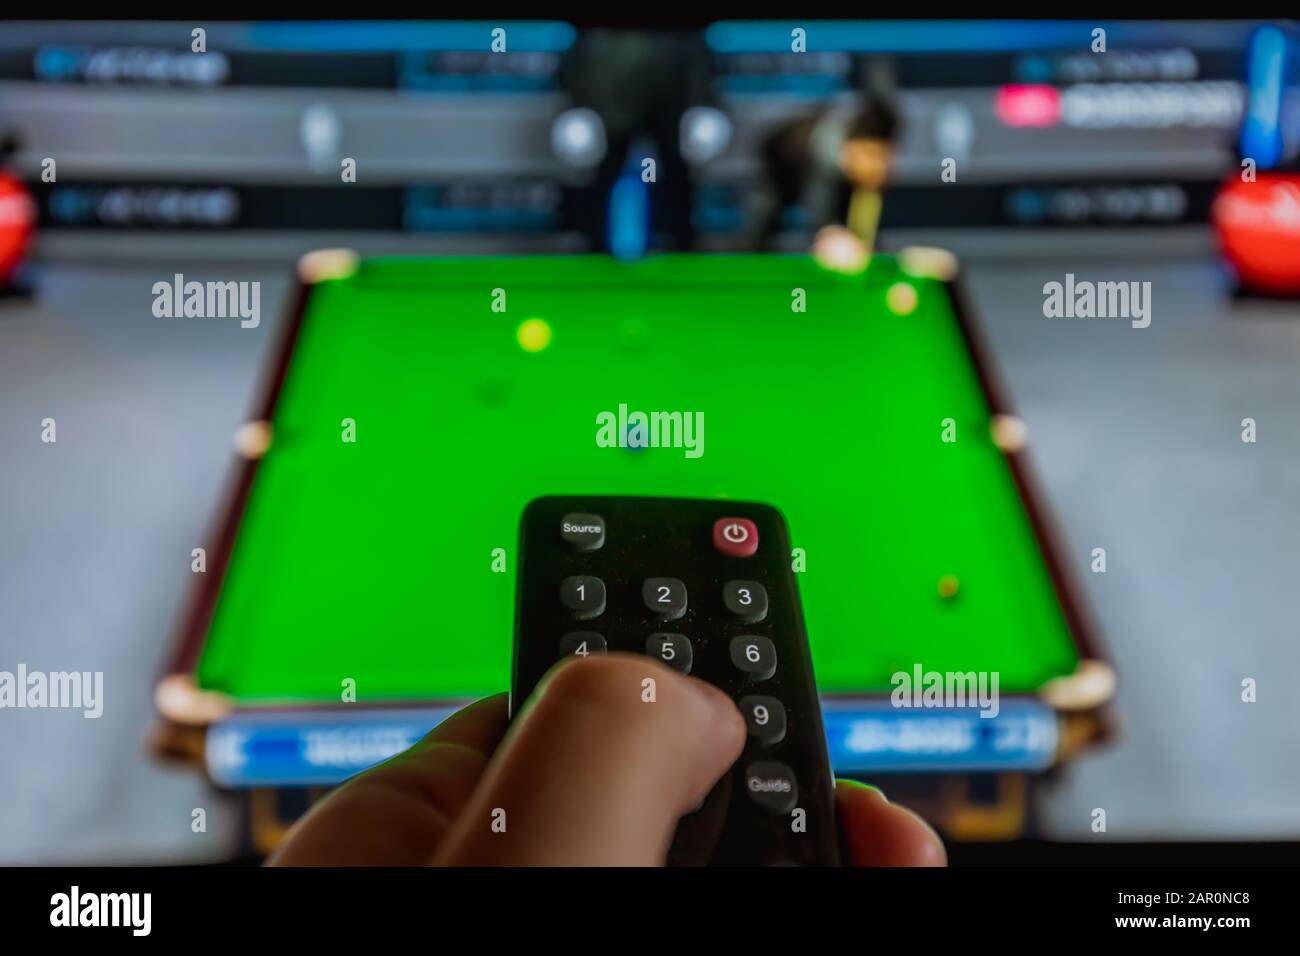 watching snooker at home tv with remote control in hand, entertainment Stock Photo